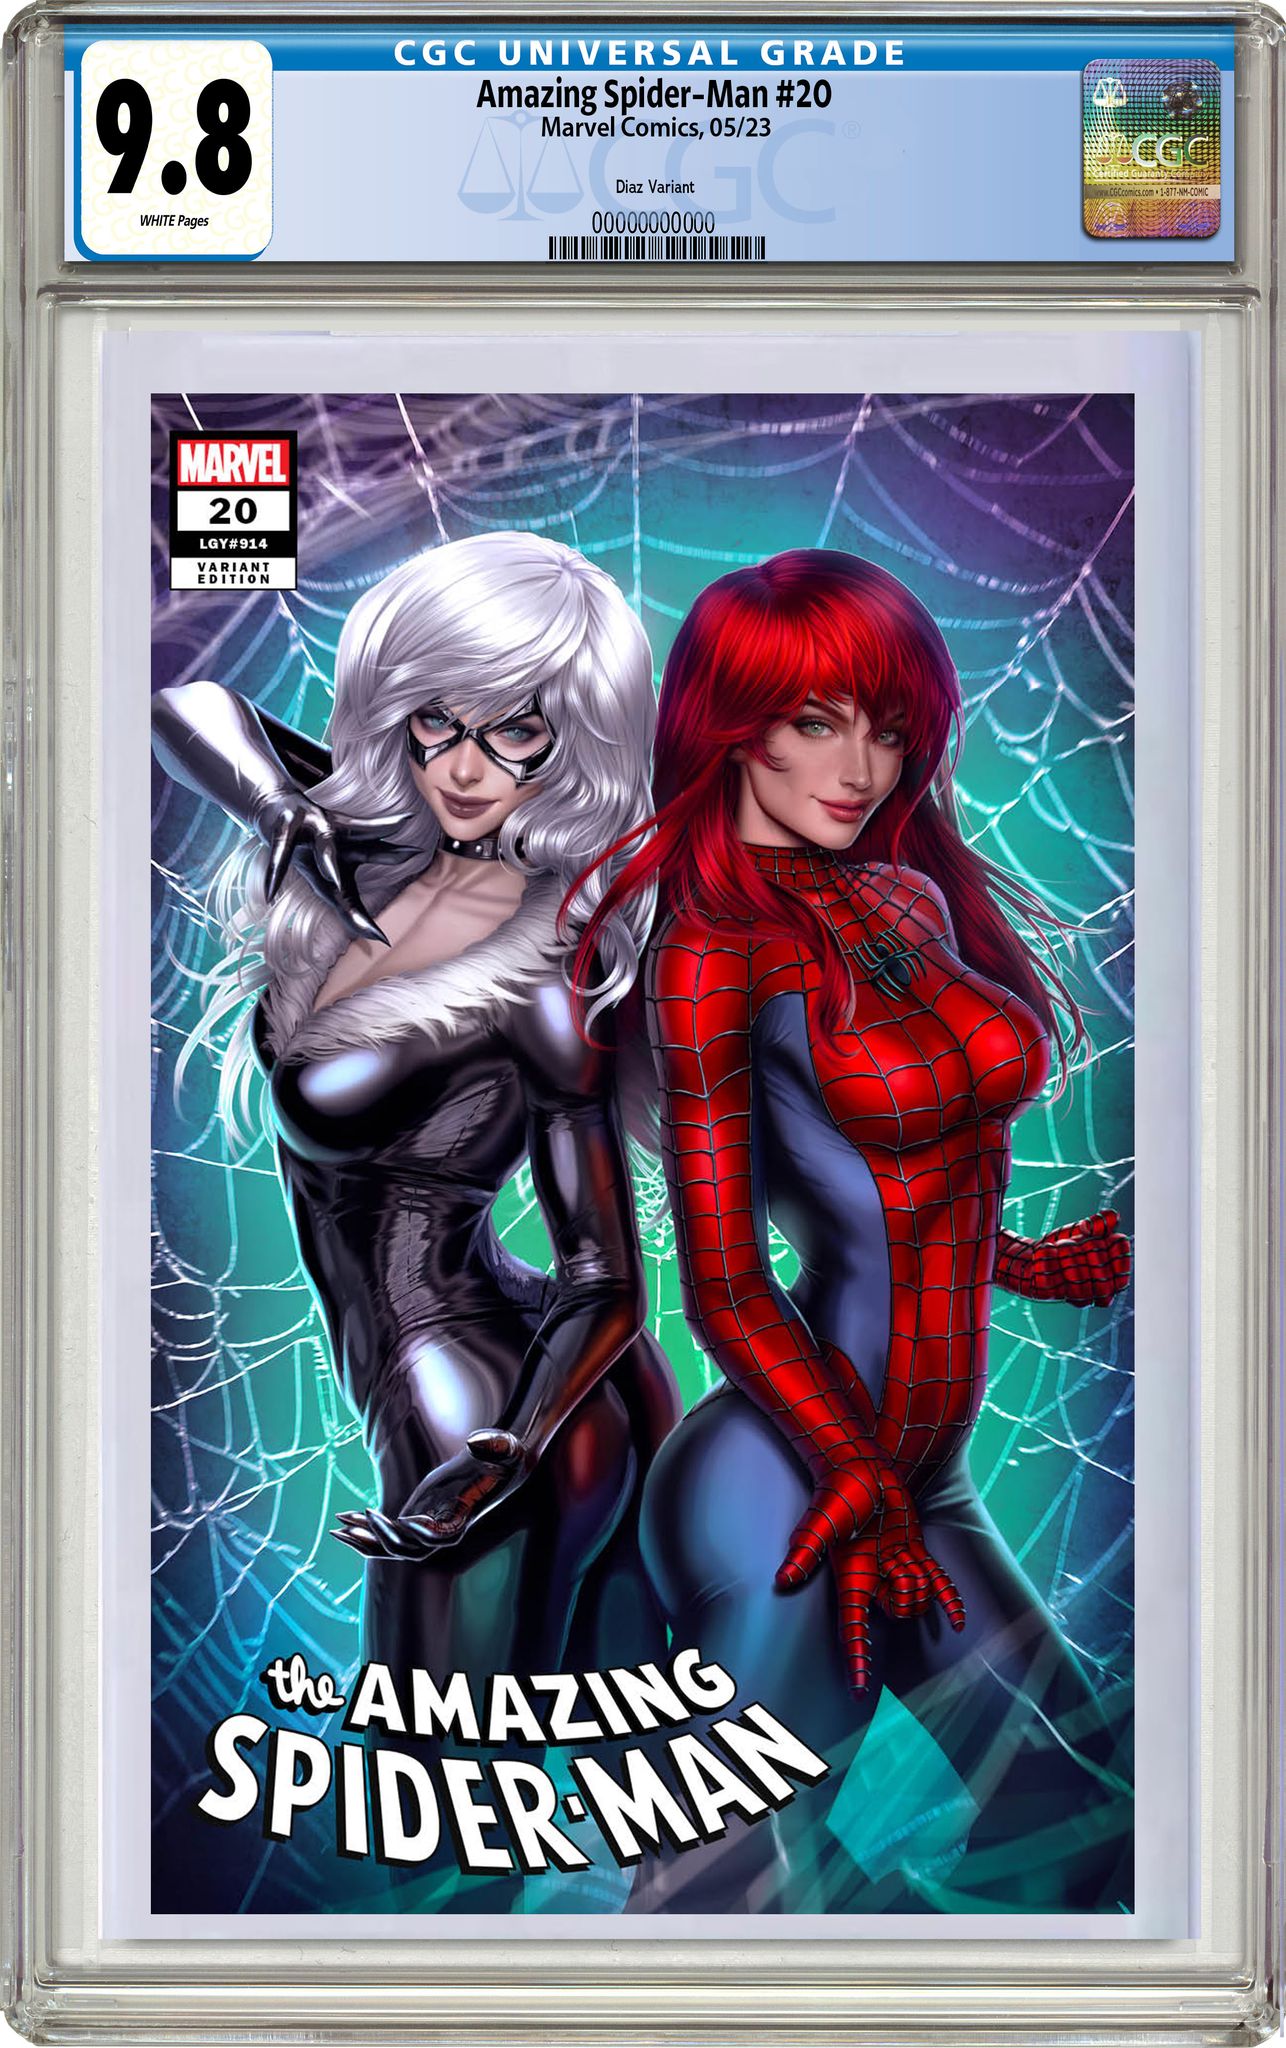 02/22/2023 AMAZING SPIDER-MAN #20 ARIEL DIAZ FIRST EVER MARVEL EXCLUSIVE VARIANT COVERS